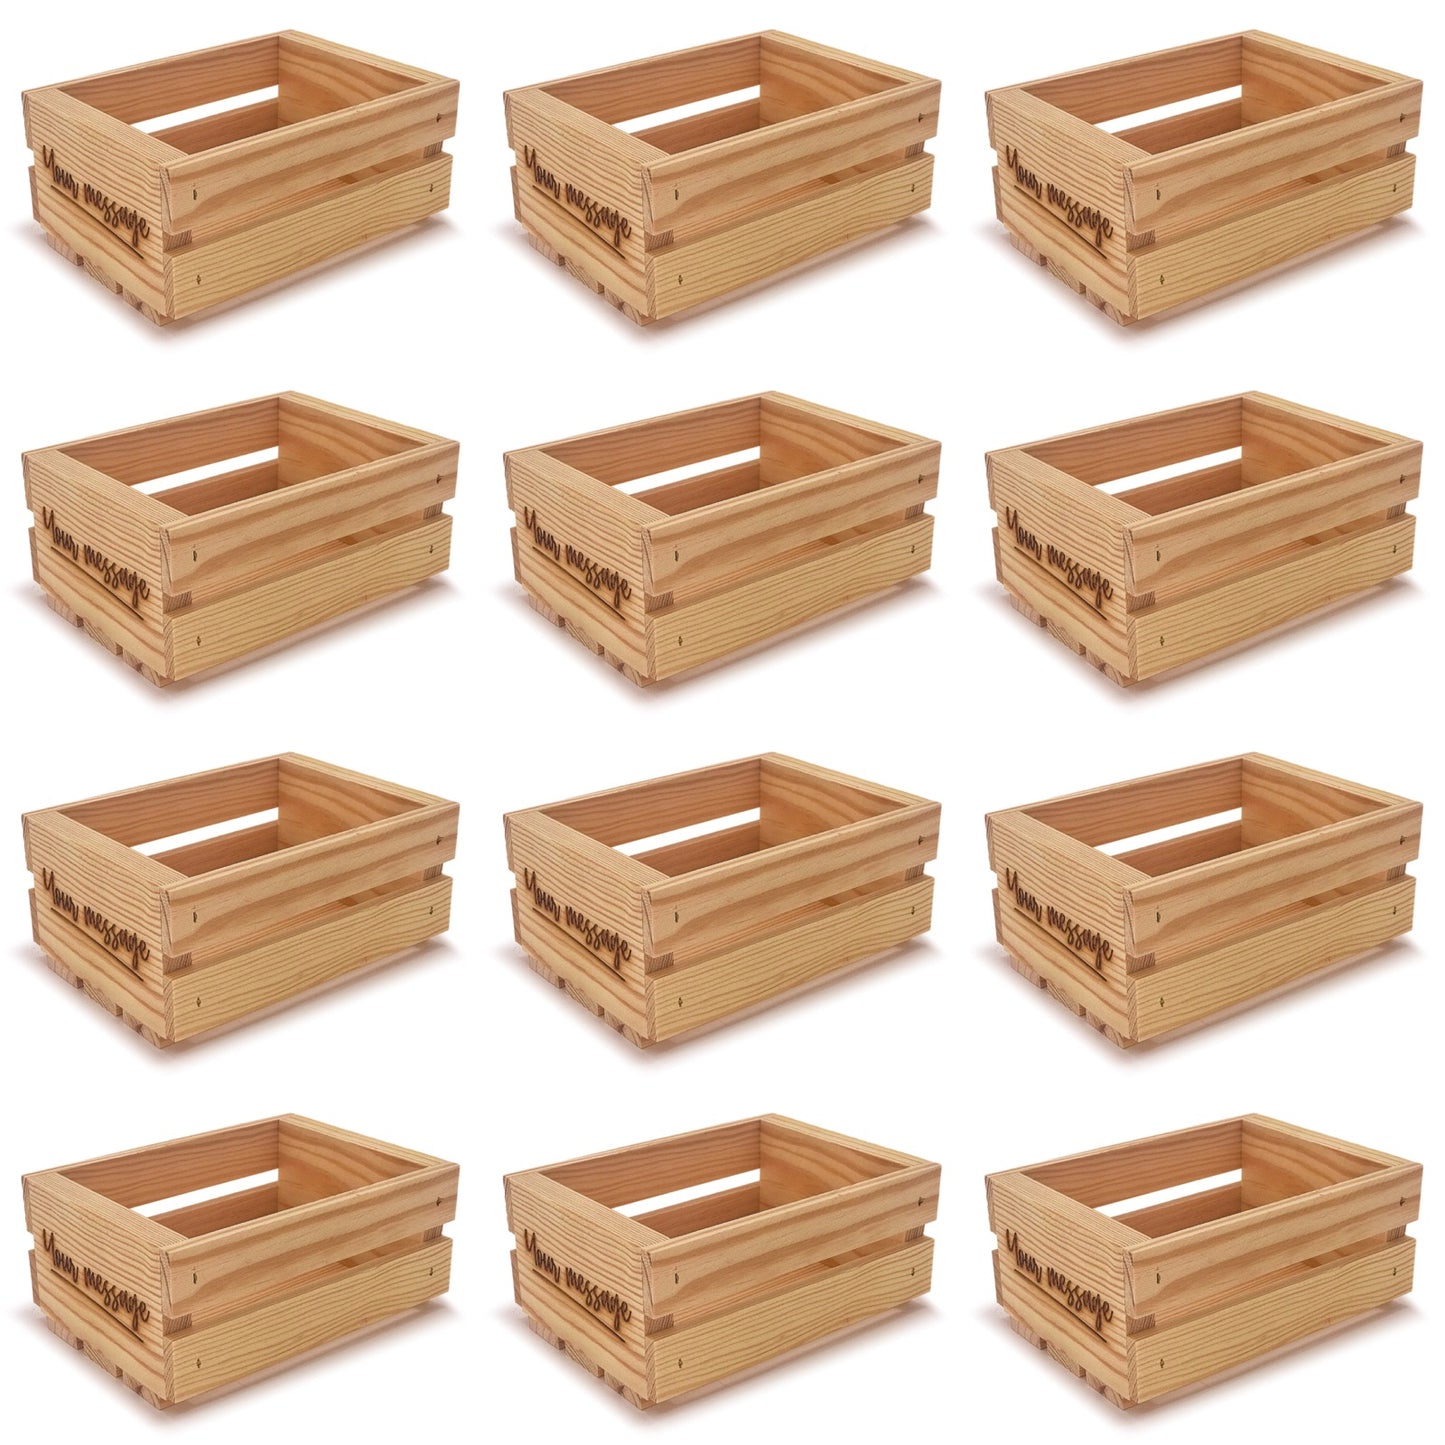 12 Small wooden crates with custom message 7.125x5.5x3.5